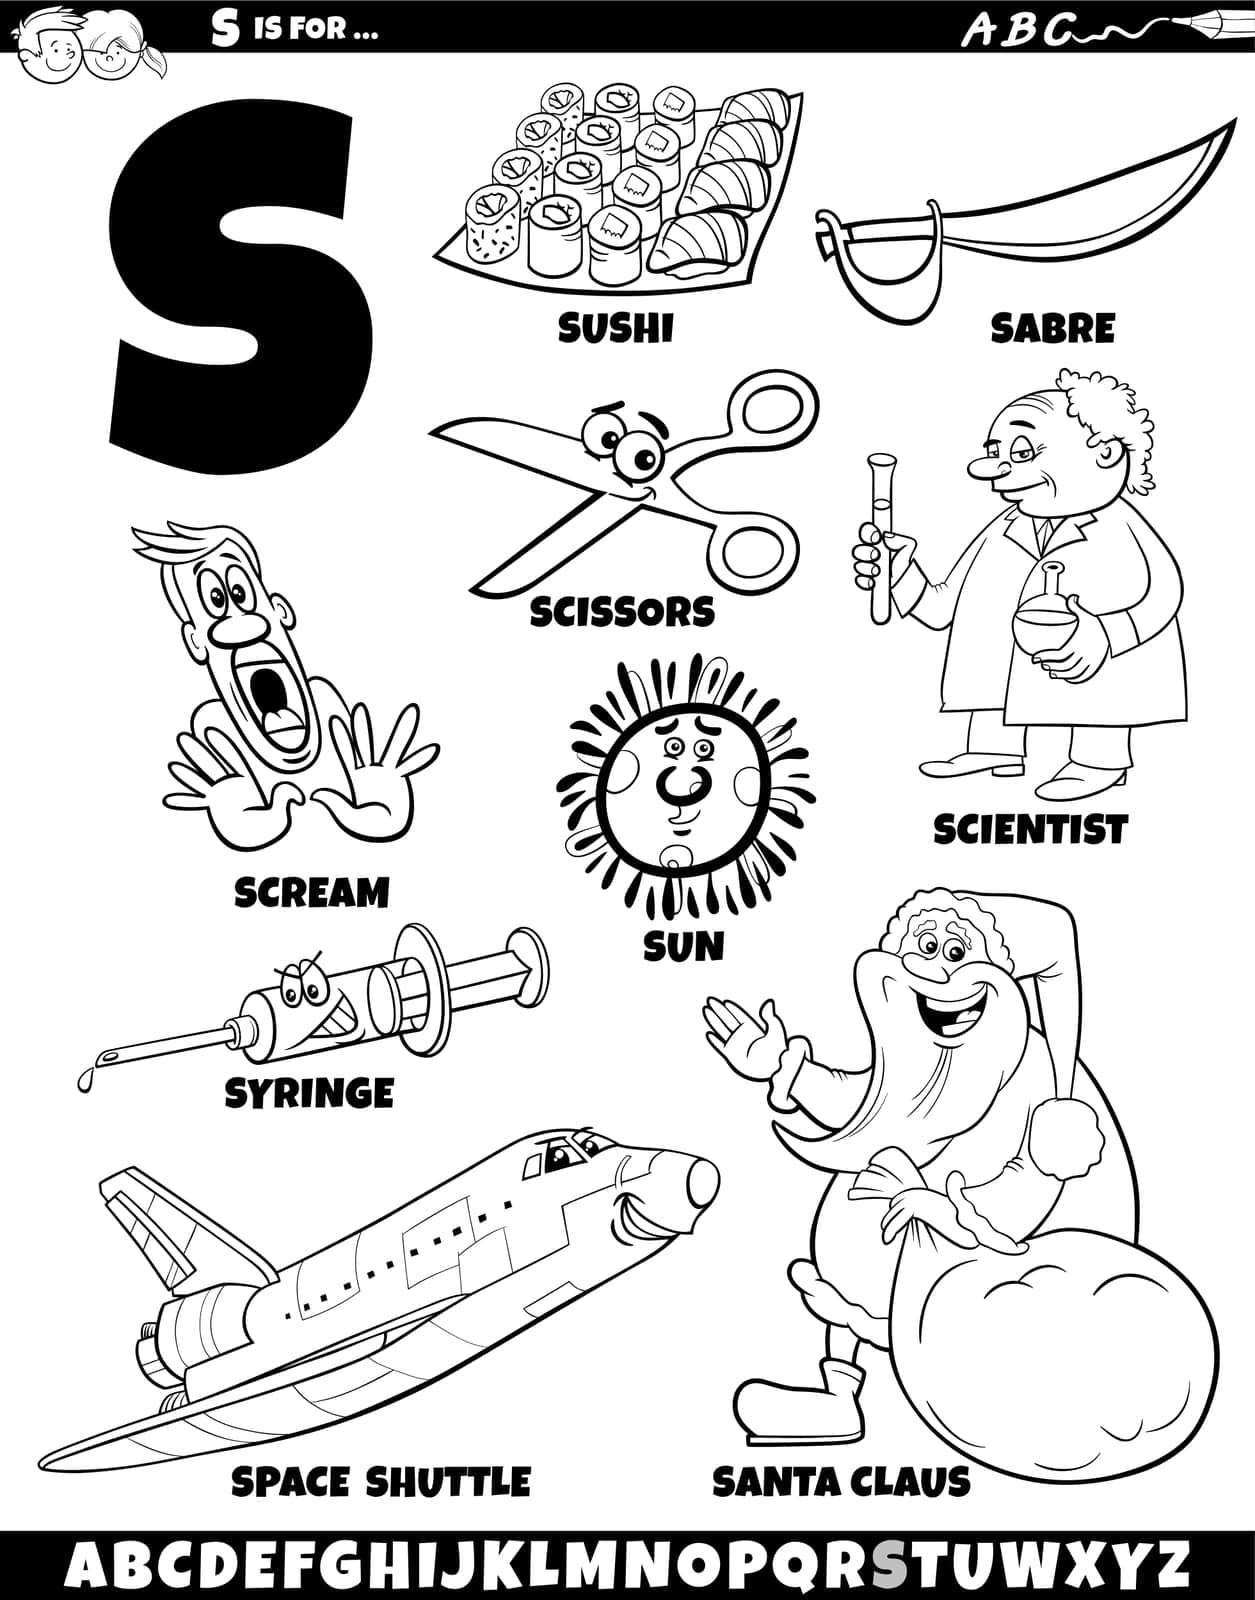 Letter S set with cartoon objects and characters coloring page by izakowski